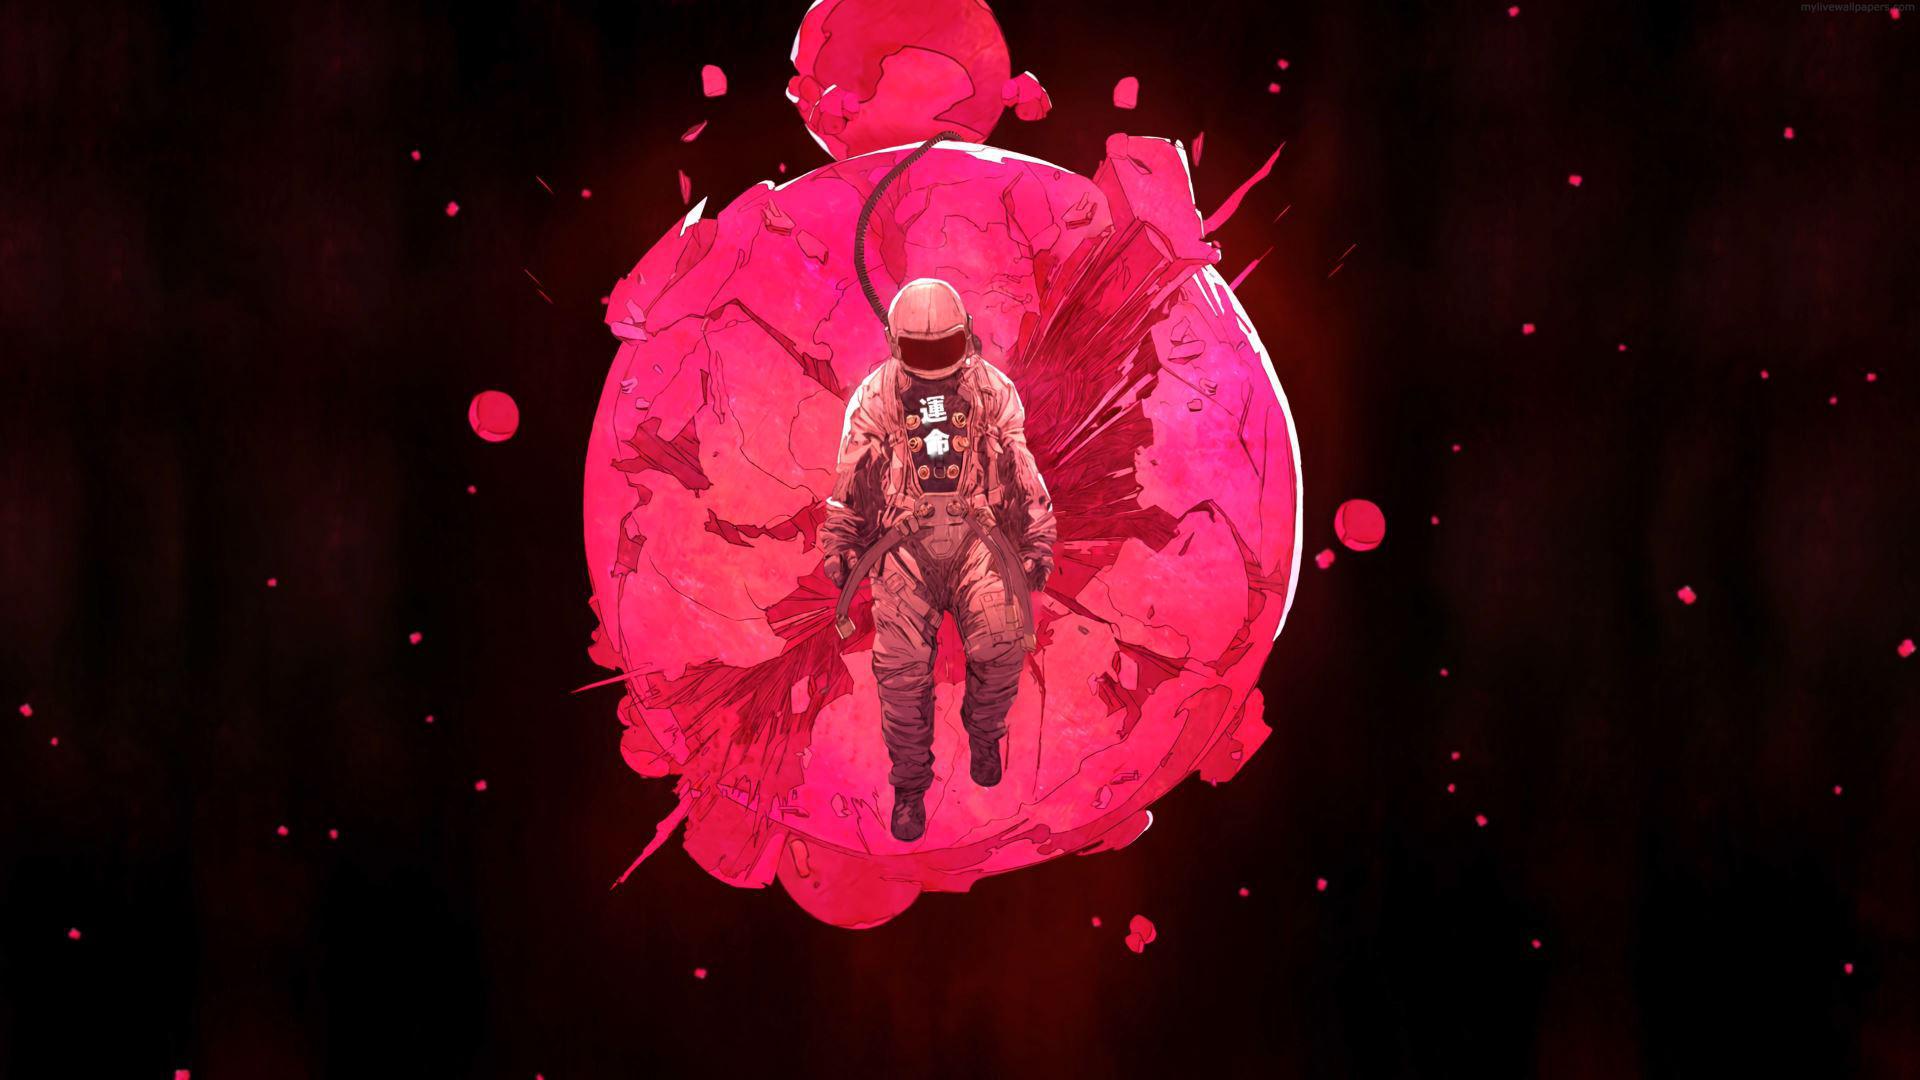 Pink Astronaut In Deep Space 4K Live Wallpaper: Free HD 4K Live Wallpaper For Windows & MacOS